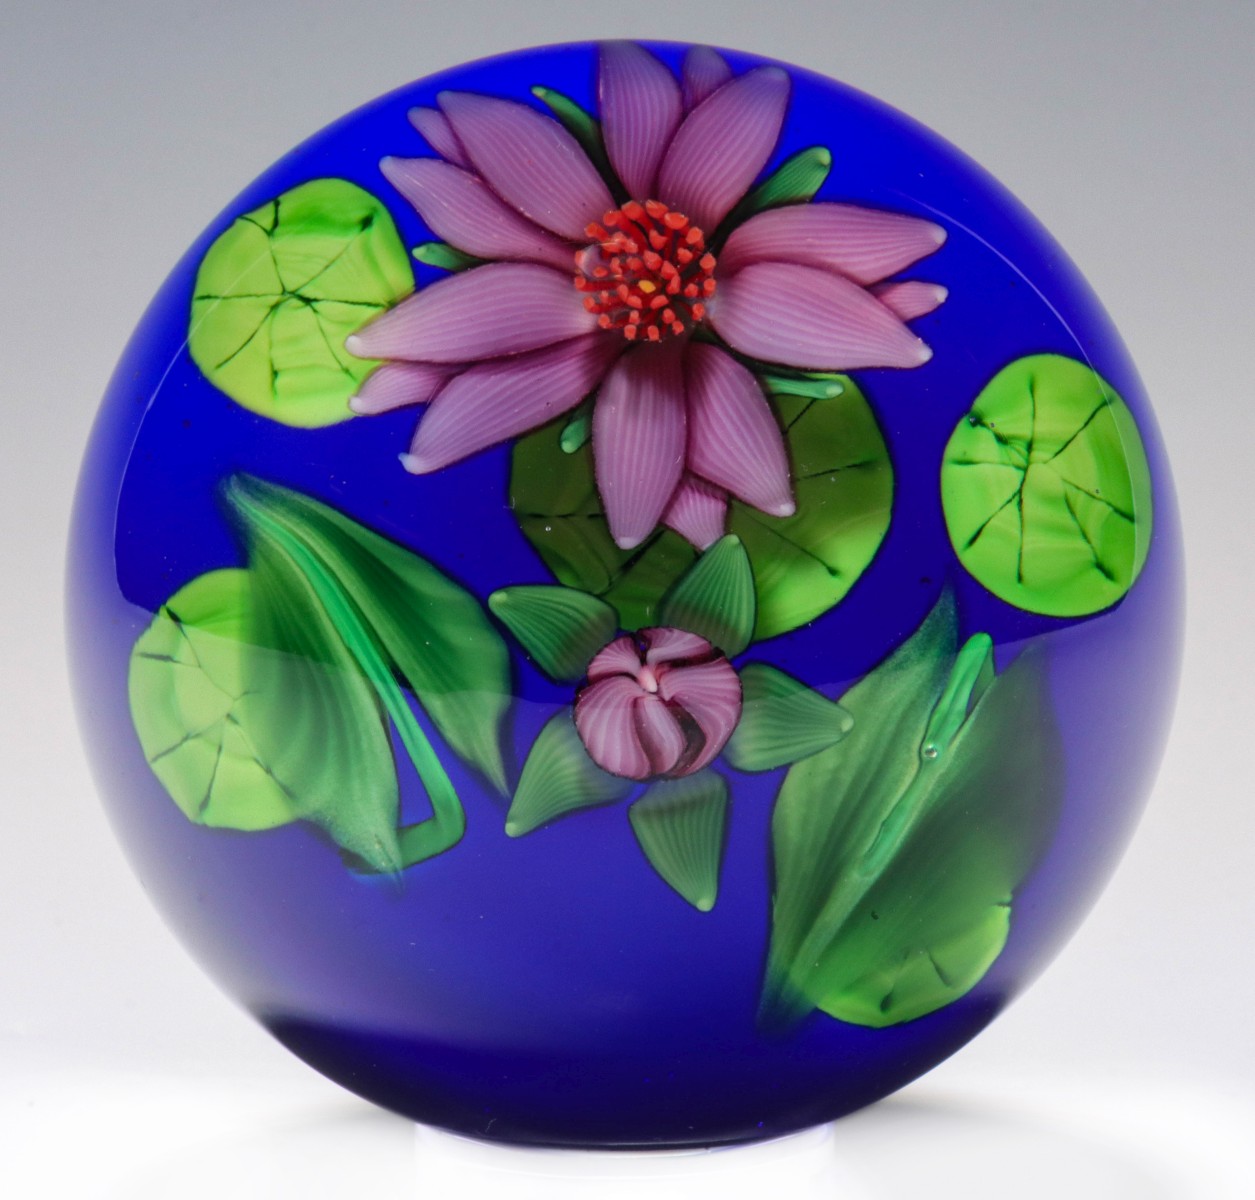 A 1991 LUNDBERG PAPERWEIGHT WITH FLOATING WATER LILIES